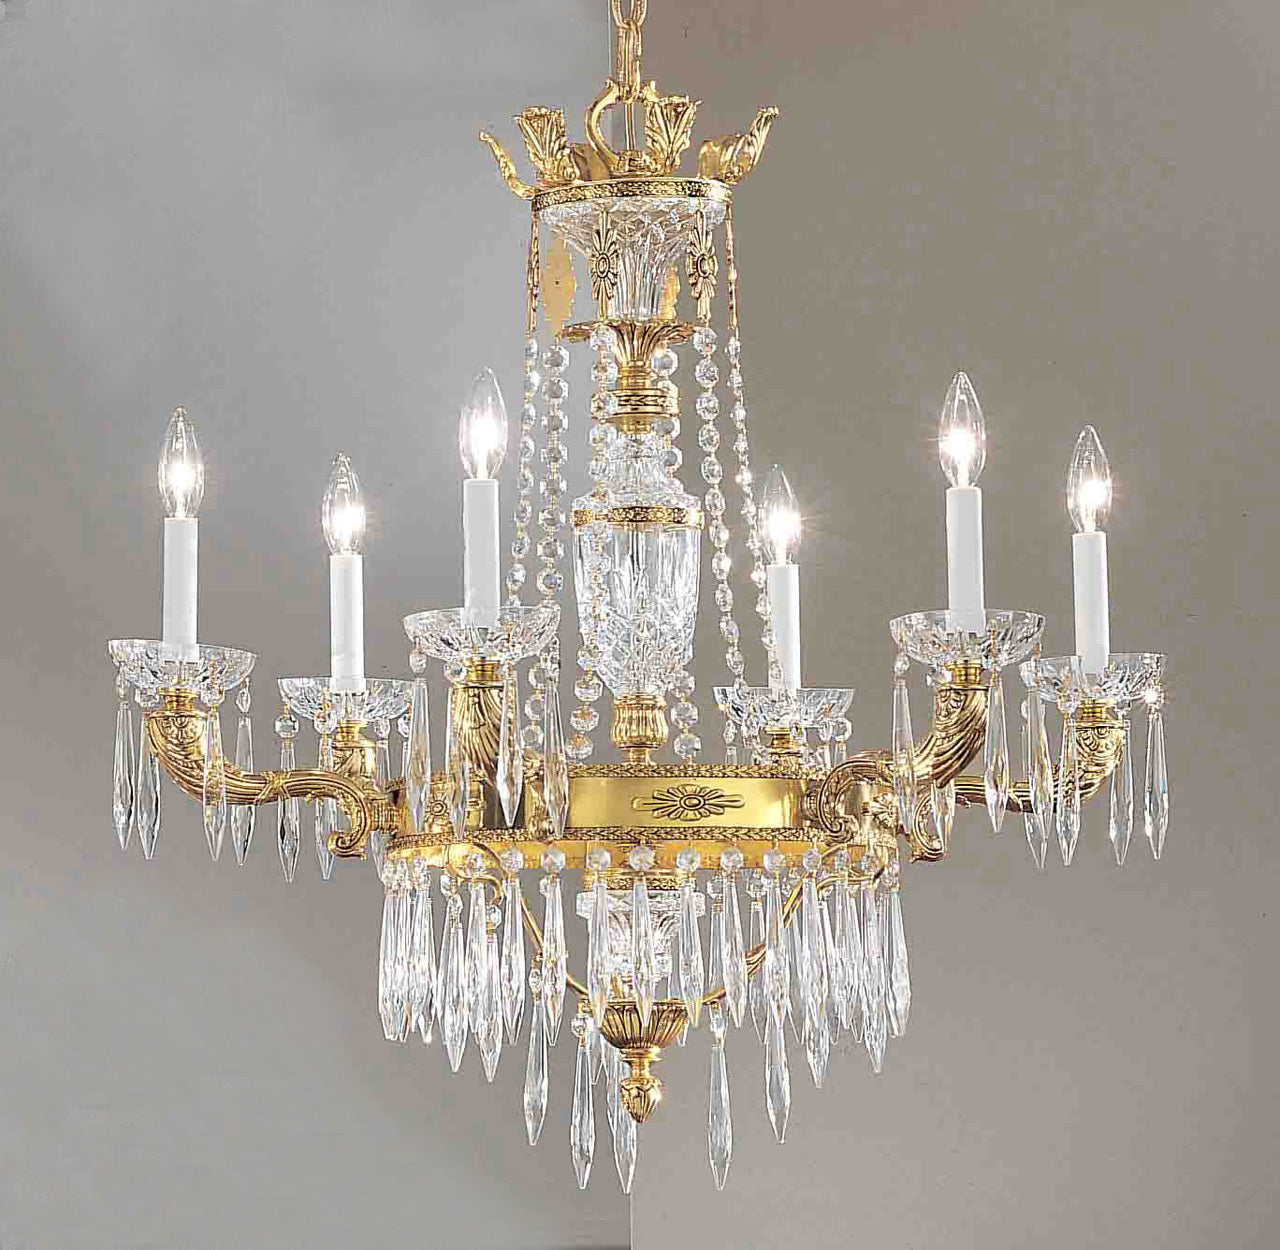 Classic Lighting 57315 AGB I Duchess Crystal Chandelier in Aged Bronze (Imported from Spain)